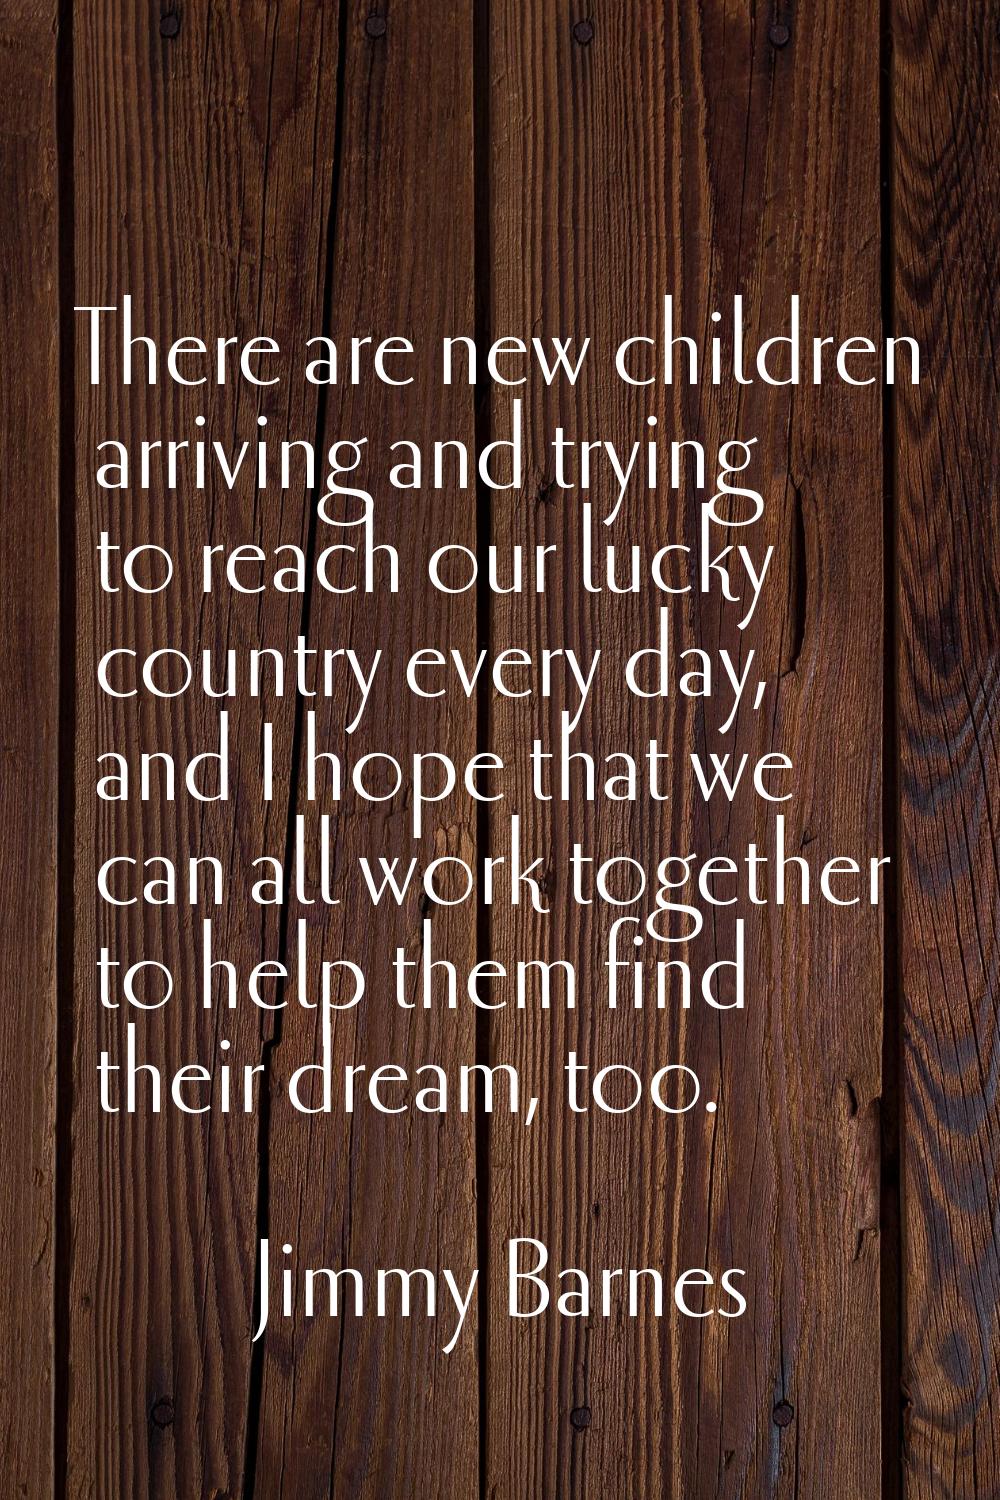 There are new children arriving and trying to reach our lucky country every day, and I hope that we